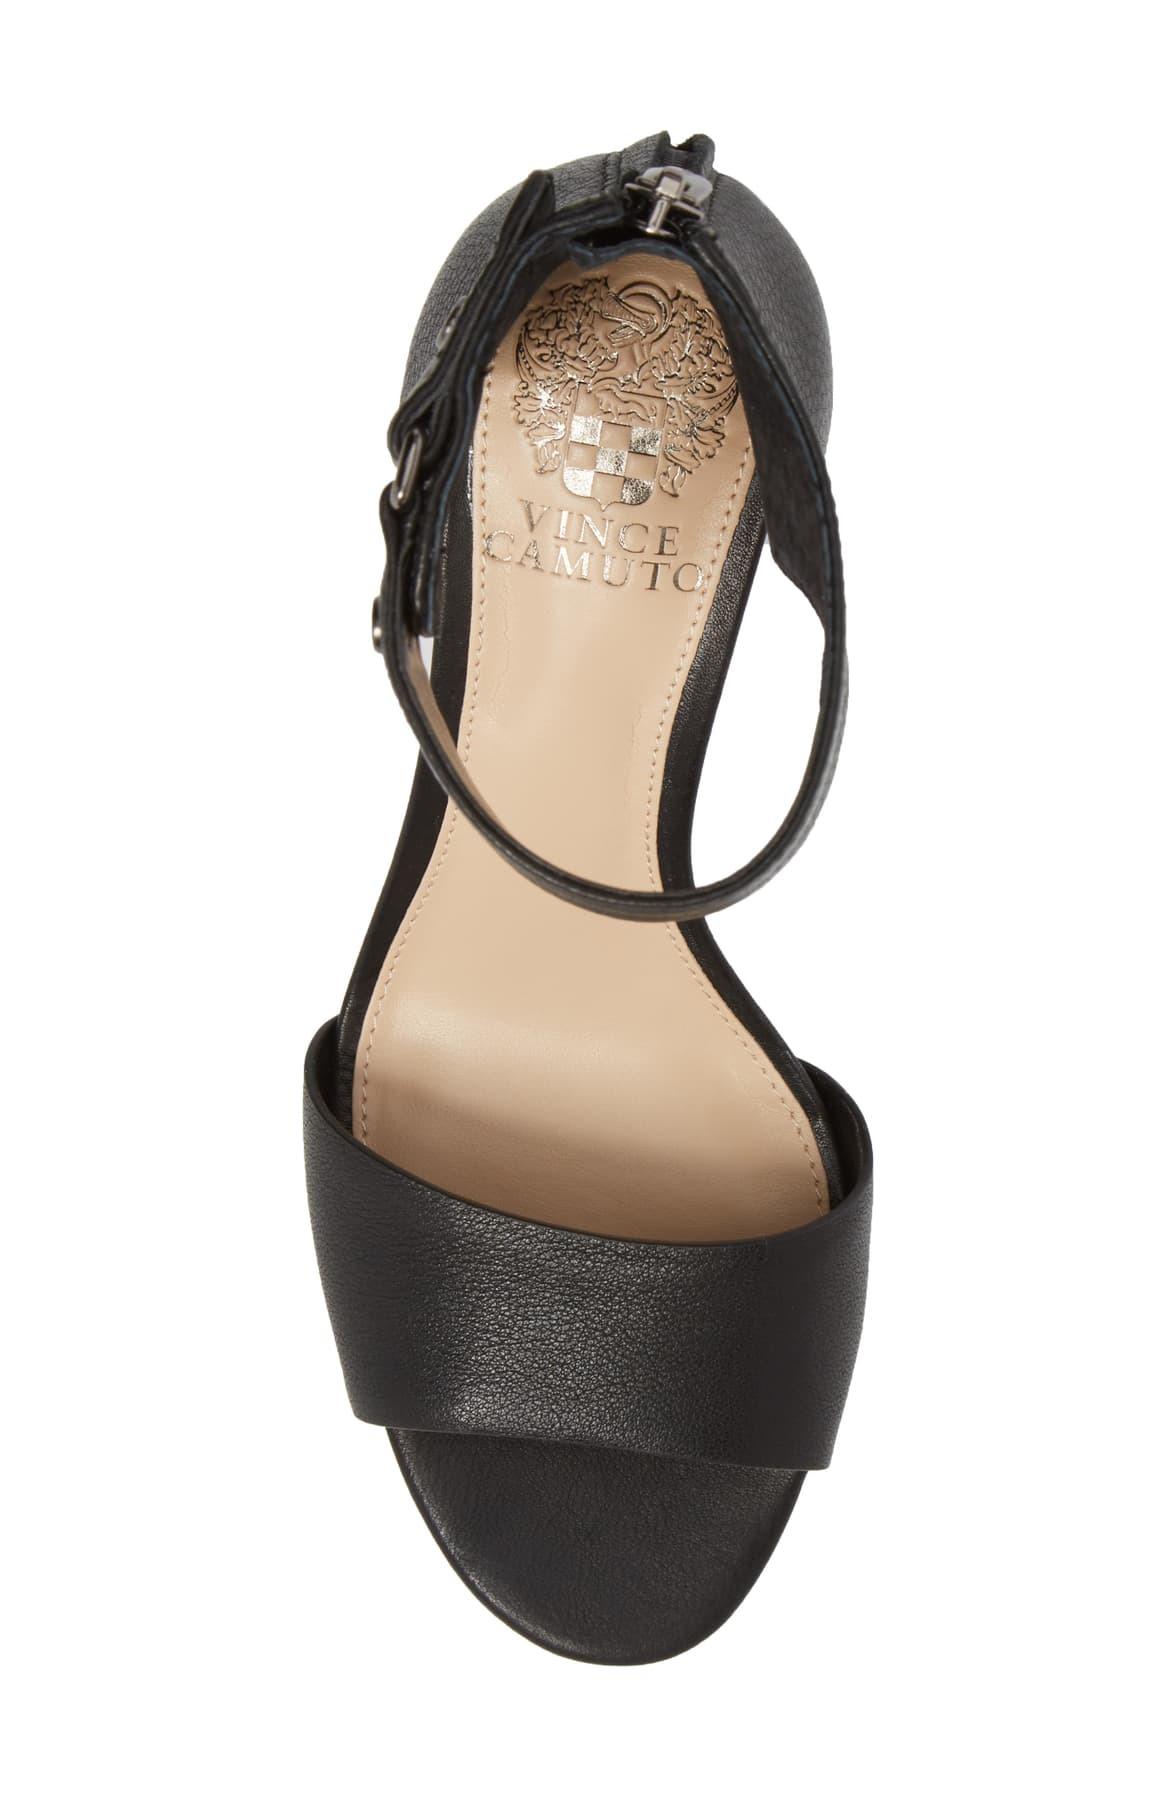 Vince Camuto Leather Jannali Ankle 